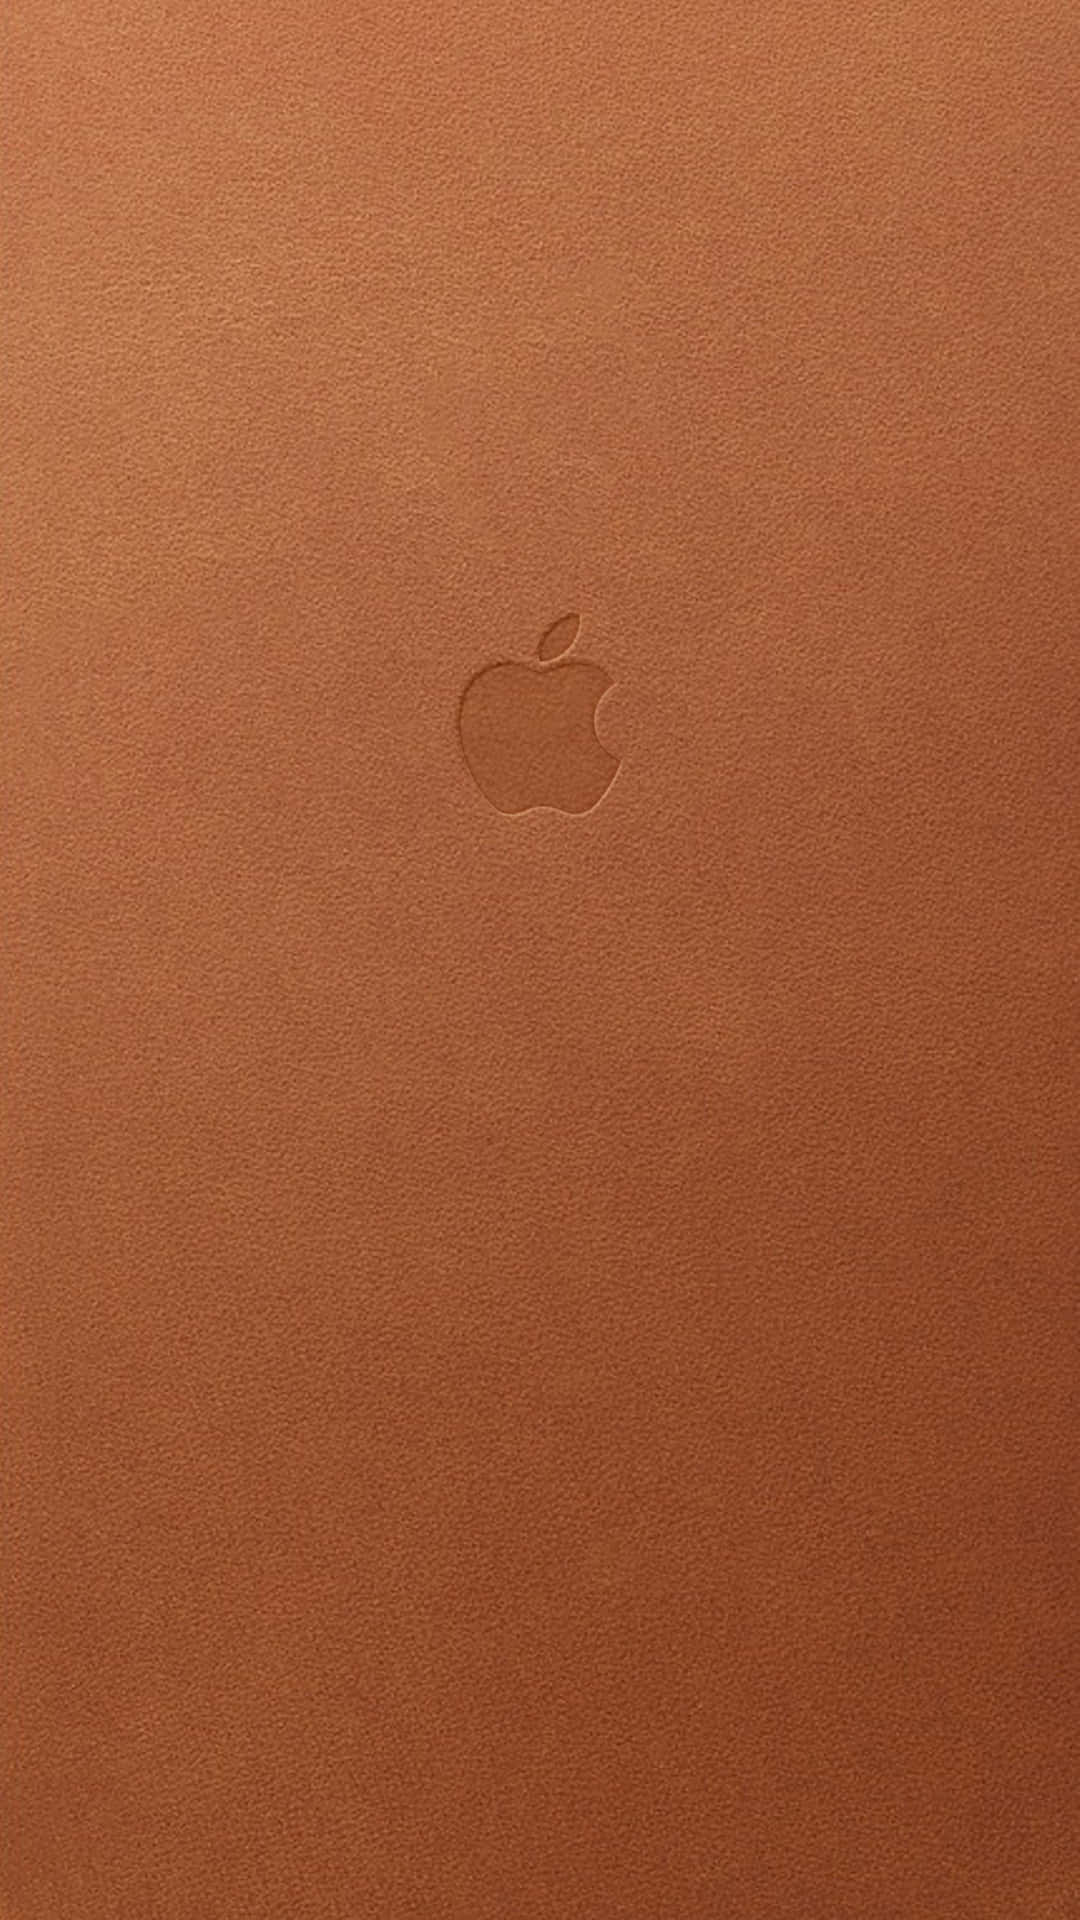 Luxurious Bronze Leather Background with Apple Logo Wallpaper